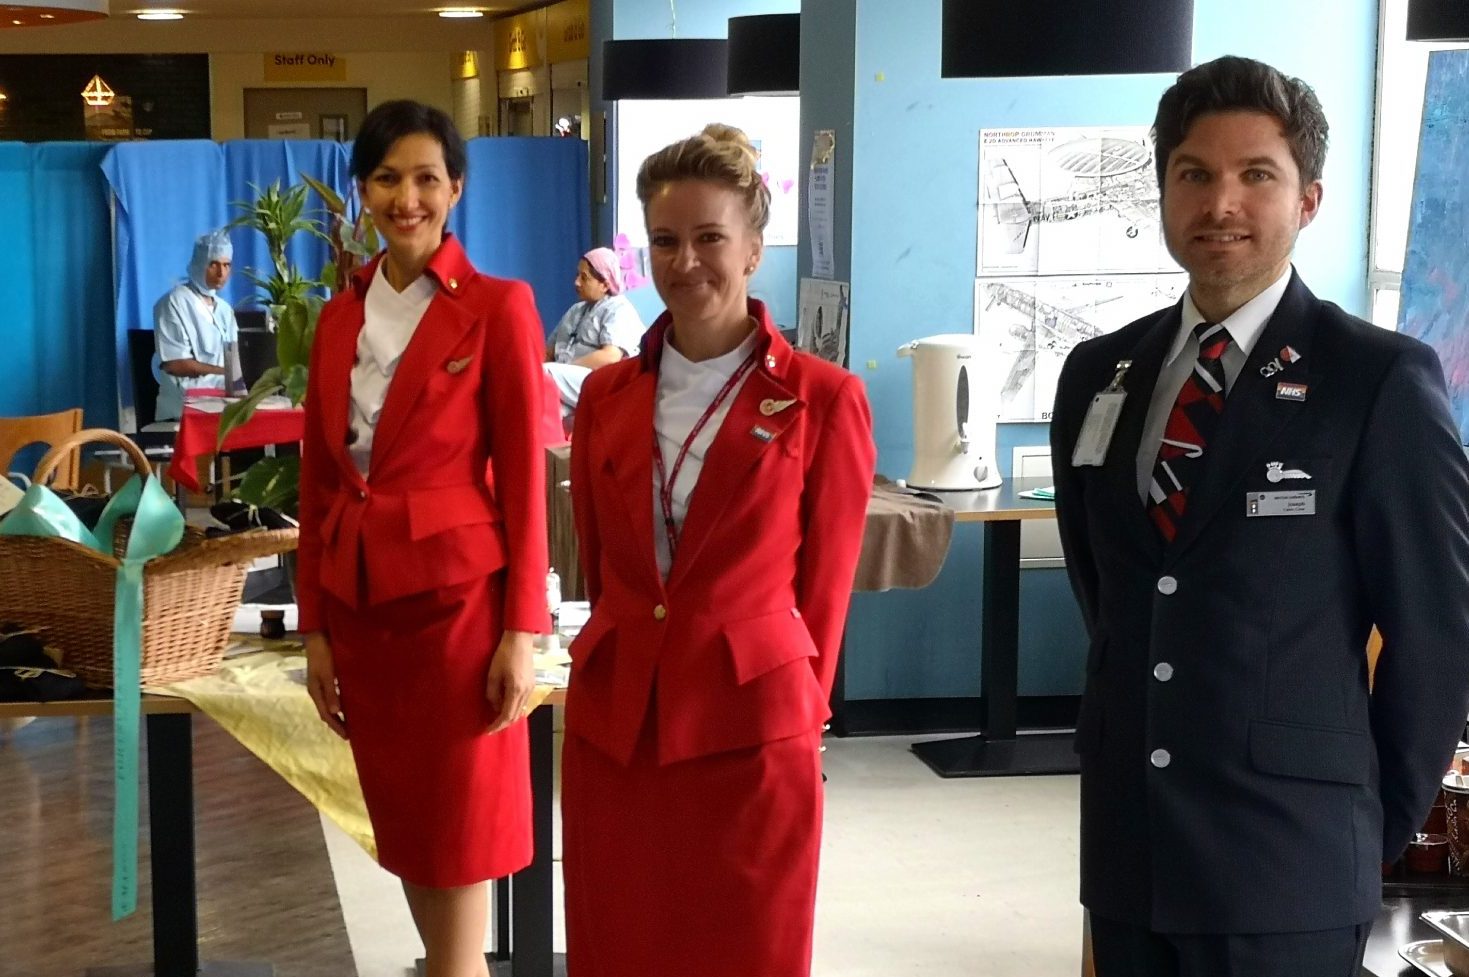 Virgin Atlantic's Lisa Holt (center) has joined other cabin crew to volunteer for UK charity Project Wingman, which supports the UK's National Health Service.